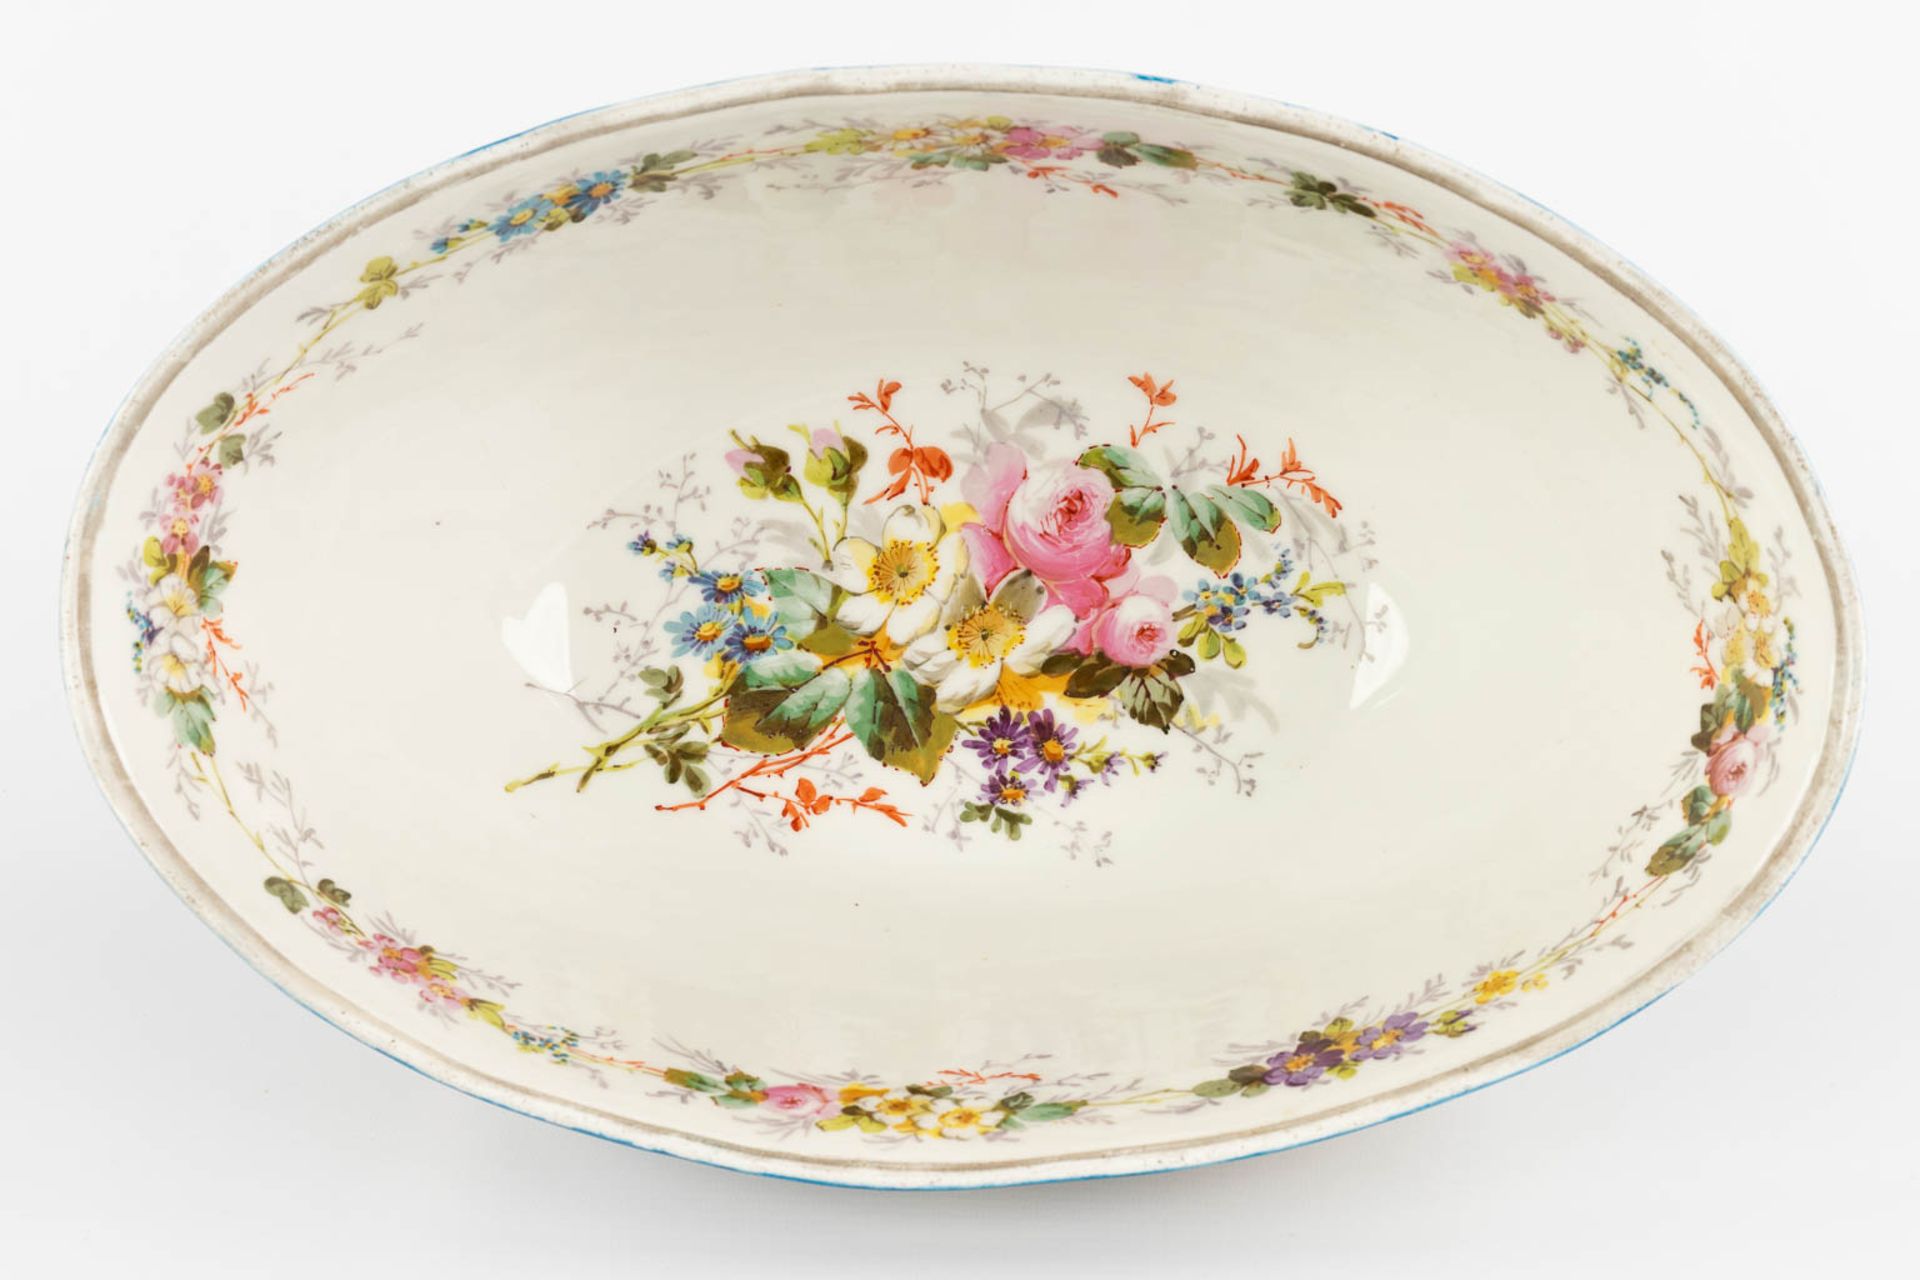 A large bowl, blue glaze with hand-painted decor, probably Limoges. (L:24 x W:39 x H:14 cm) - Image 7 of 12